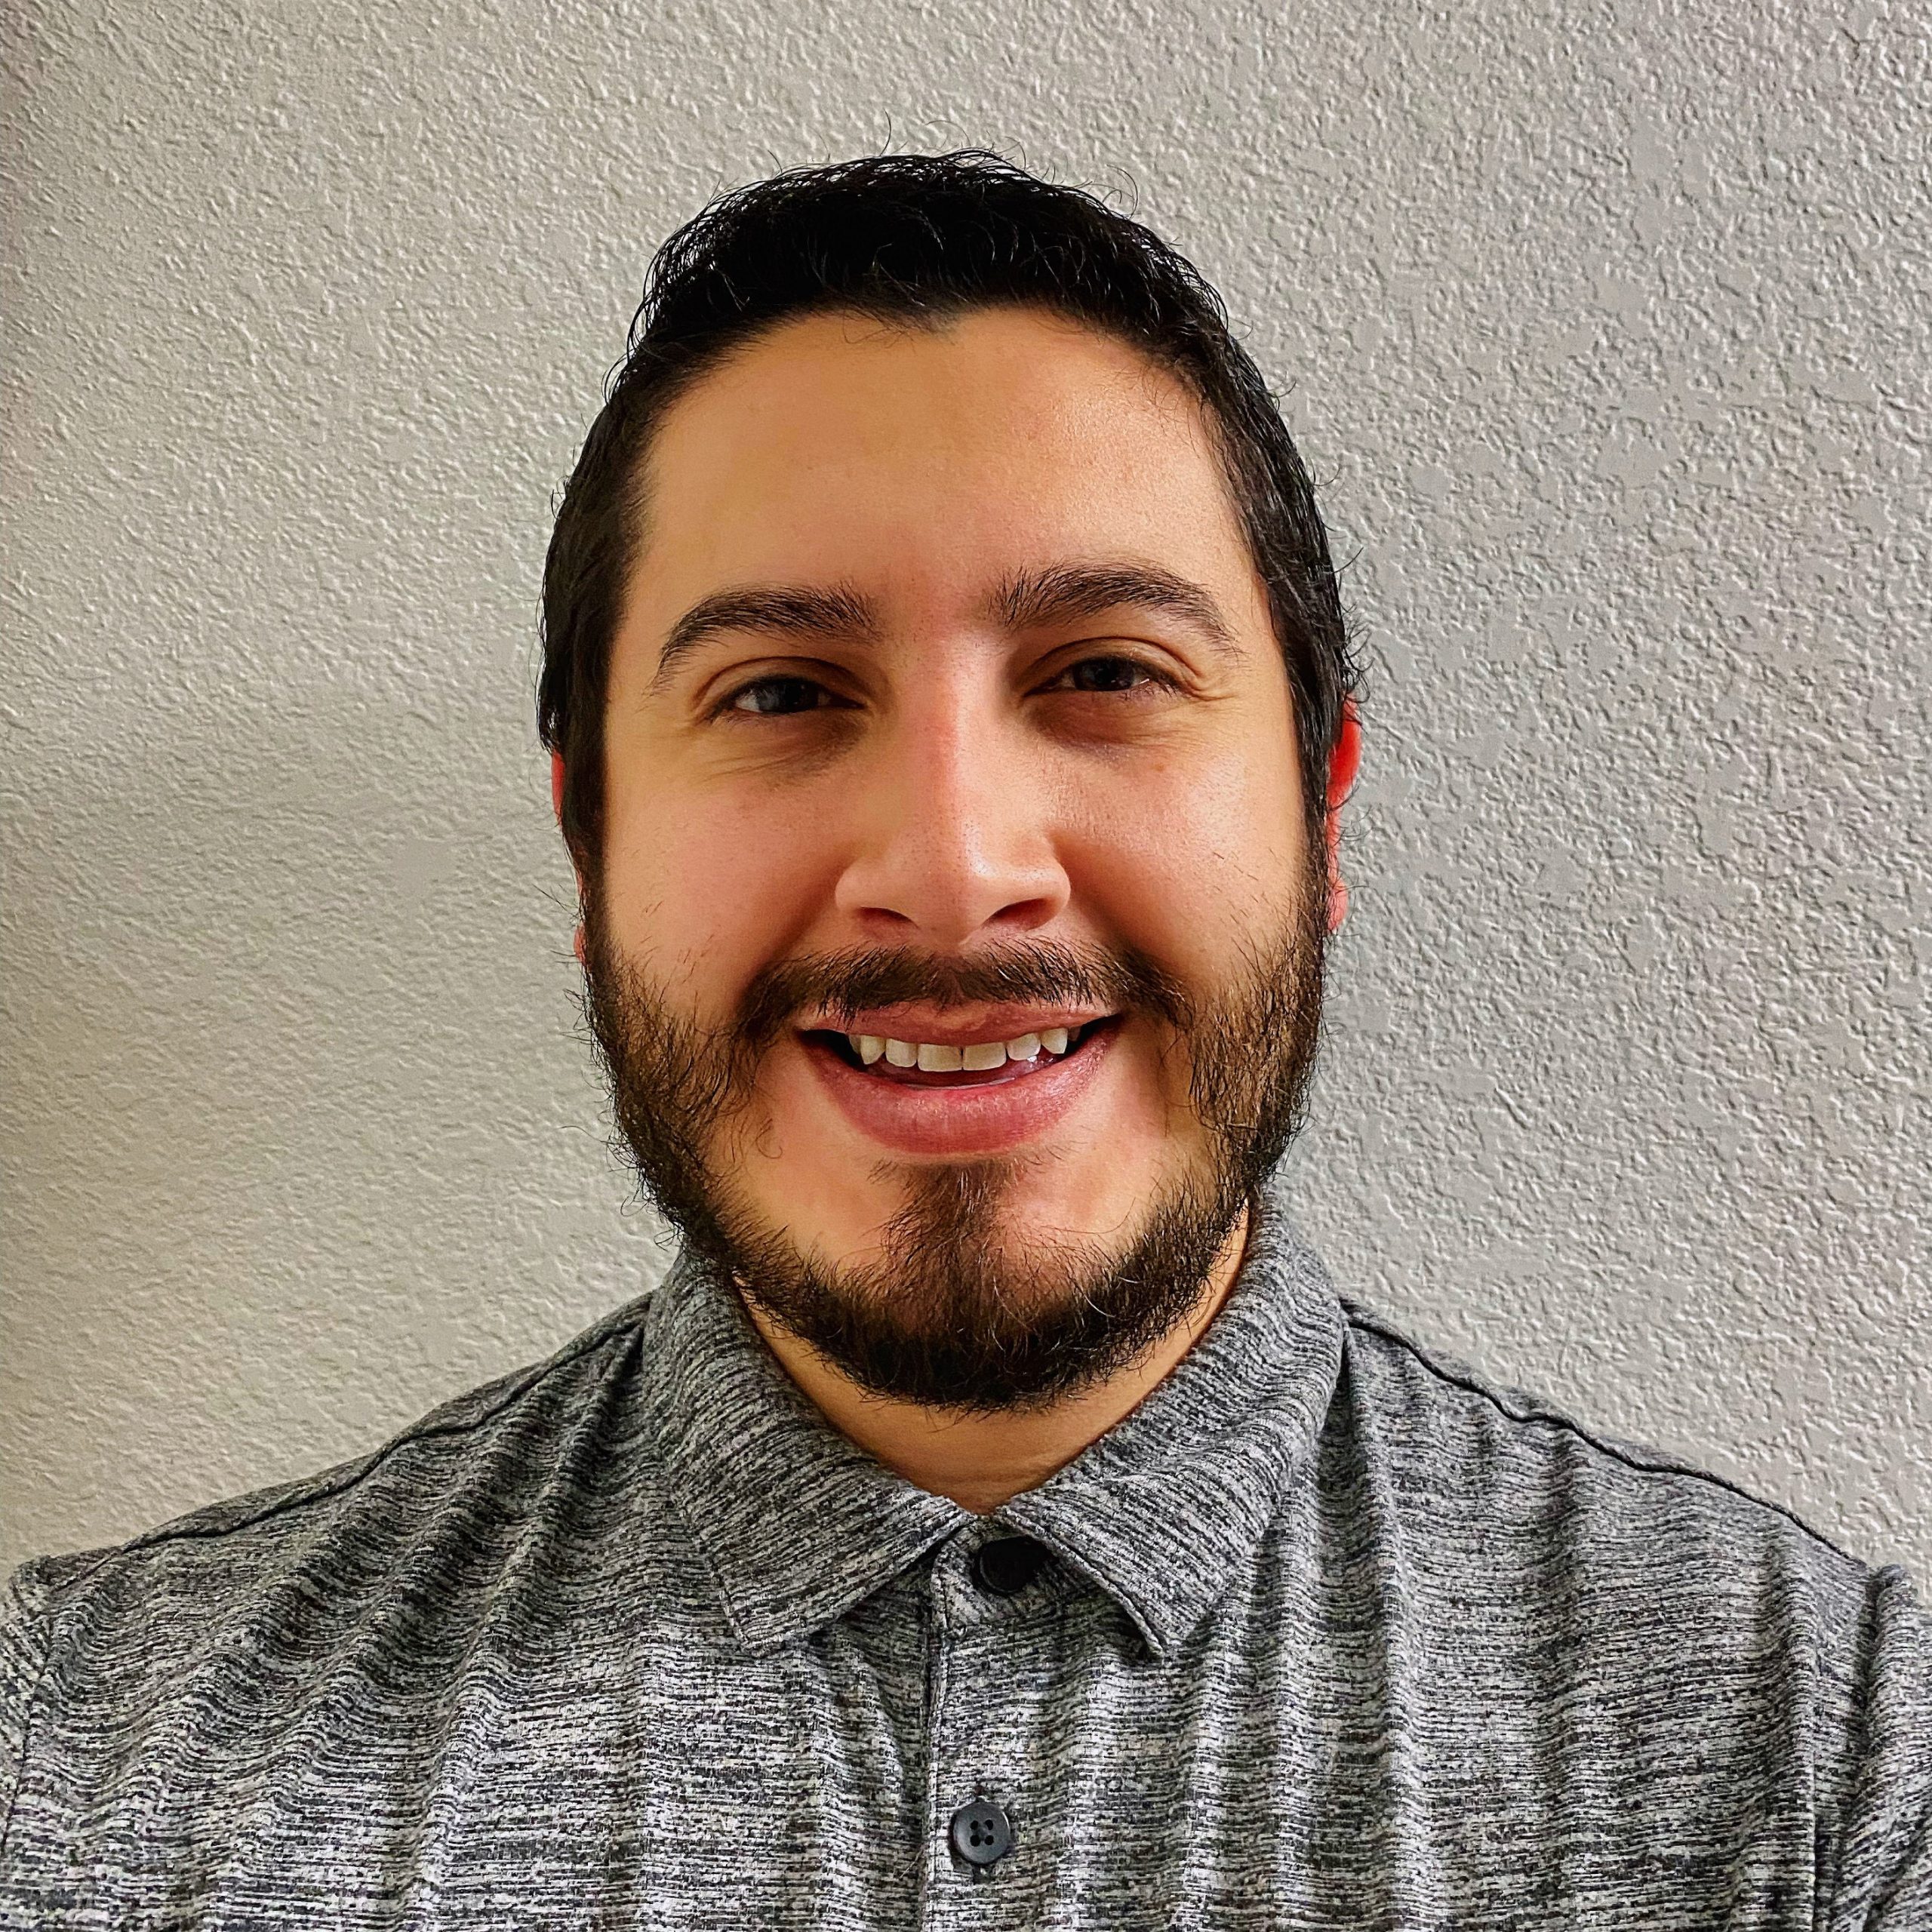 Photo of AT Coordinator Jesse Armijo smiling wearing a gray top in front of a white wall